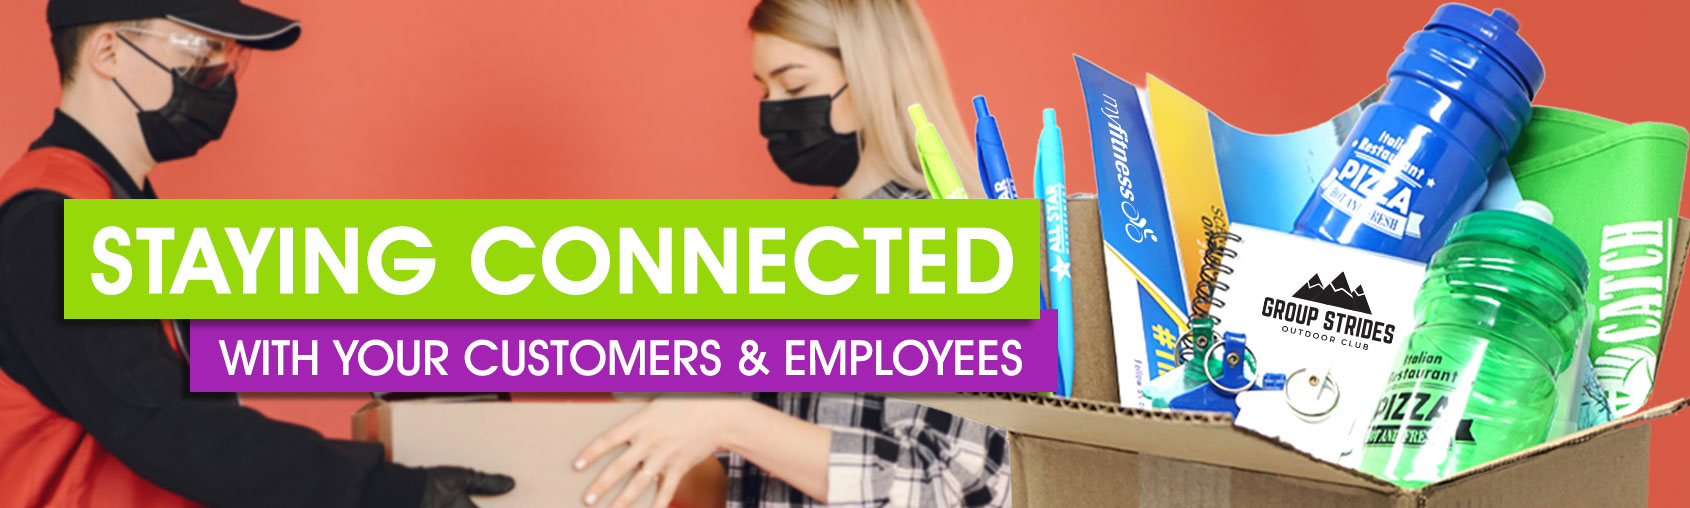 Staying Connected with Your Customers & Employees